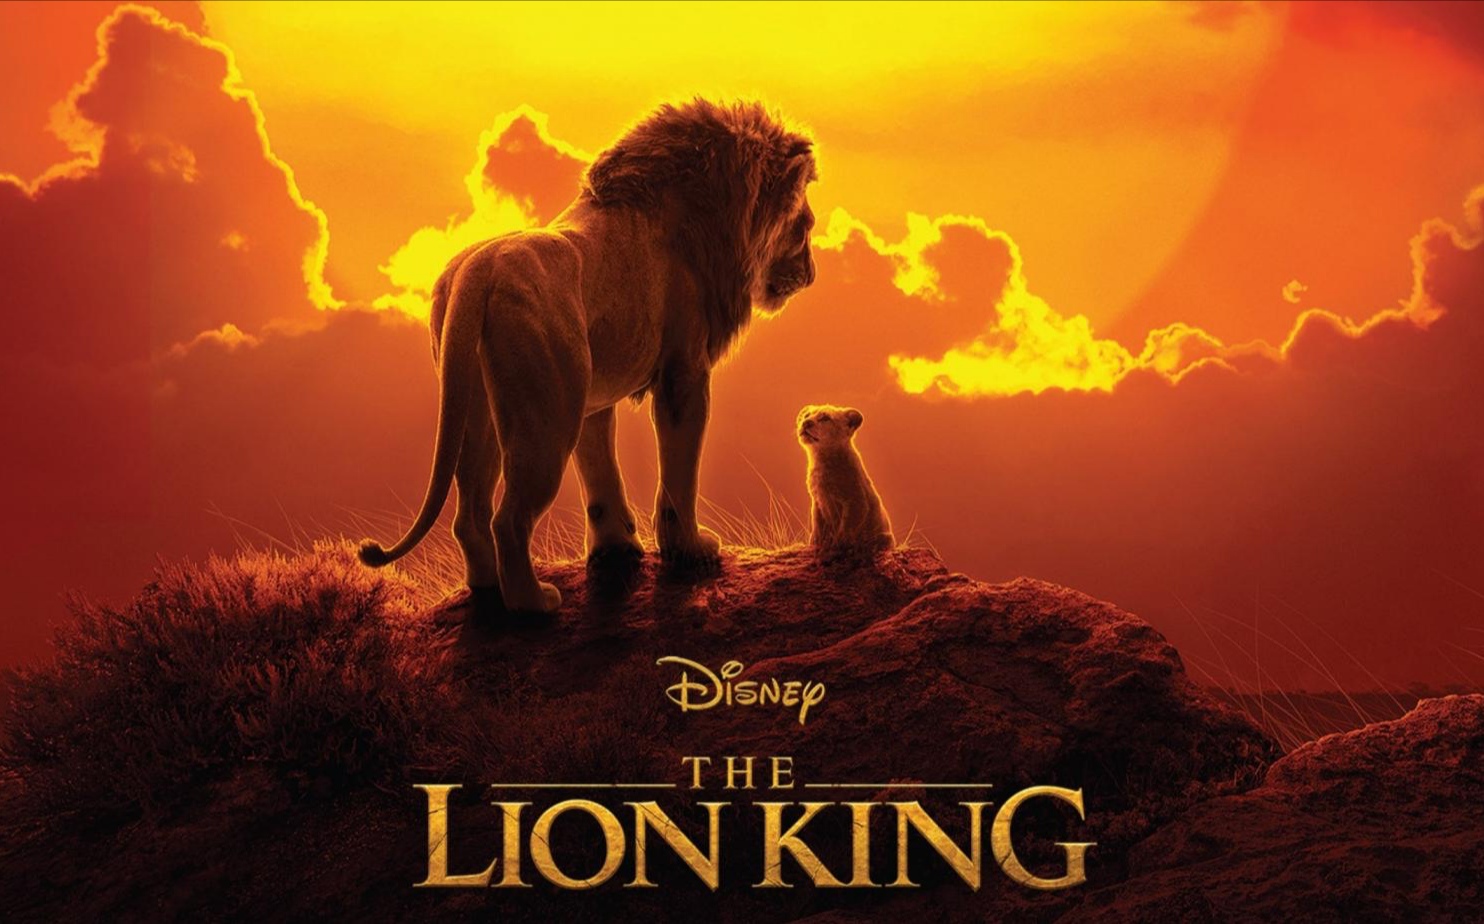 Download The King 2019 Full Hd Quality